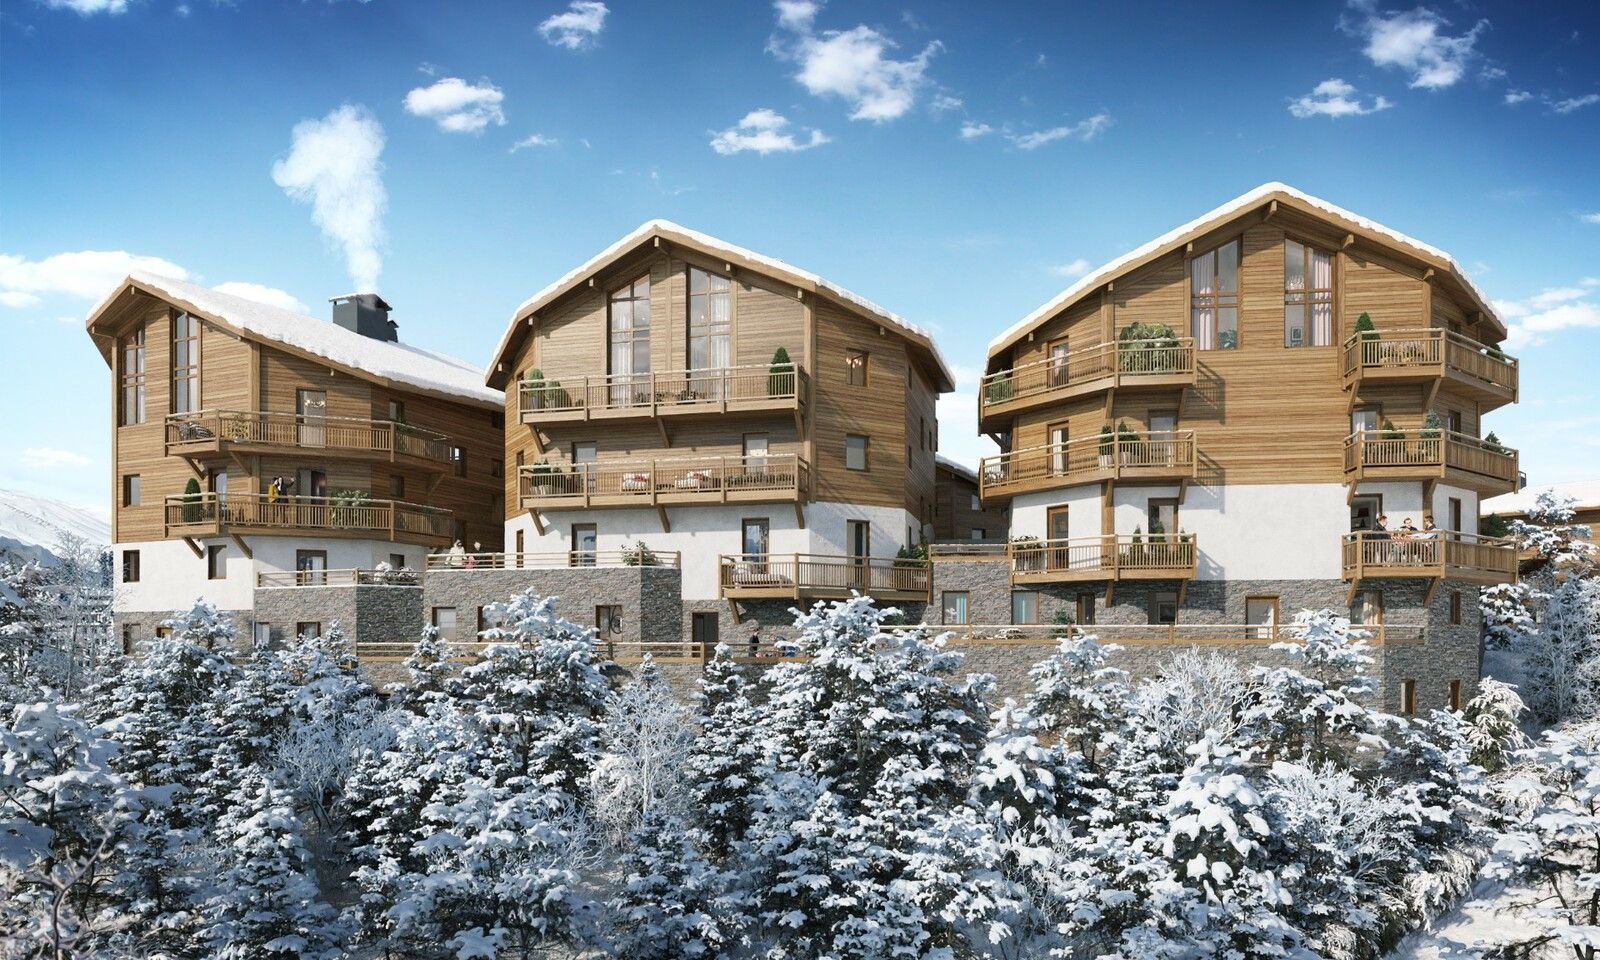 3 bed Apartment For Sale in Alpe d'Huez Grand Domaine, French Alps